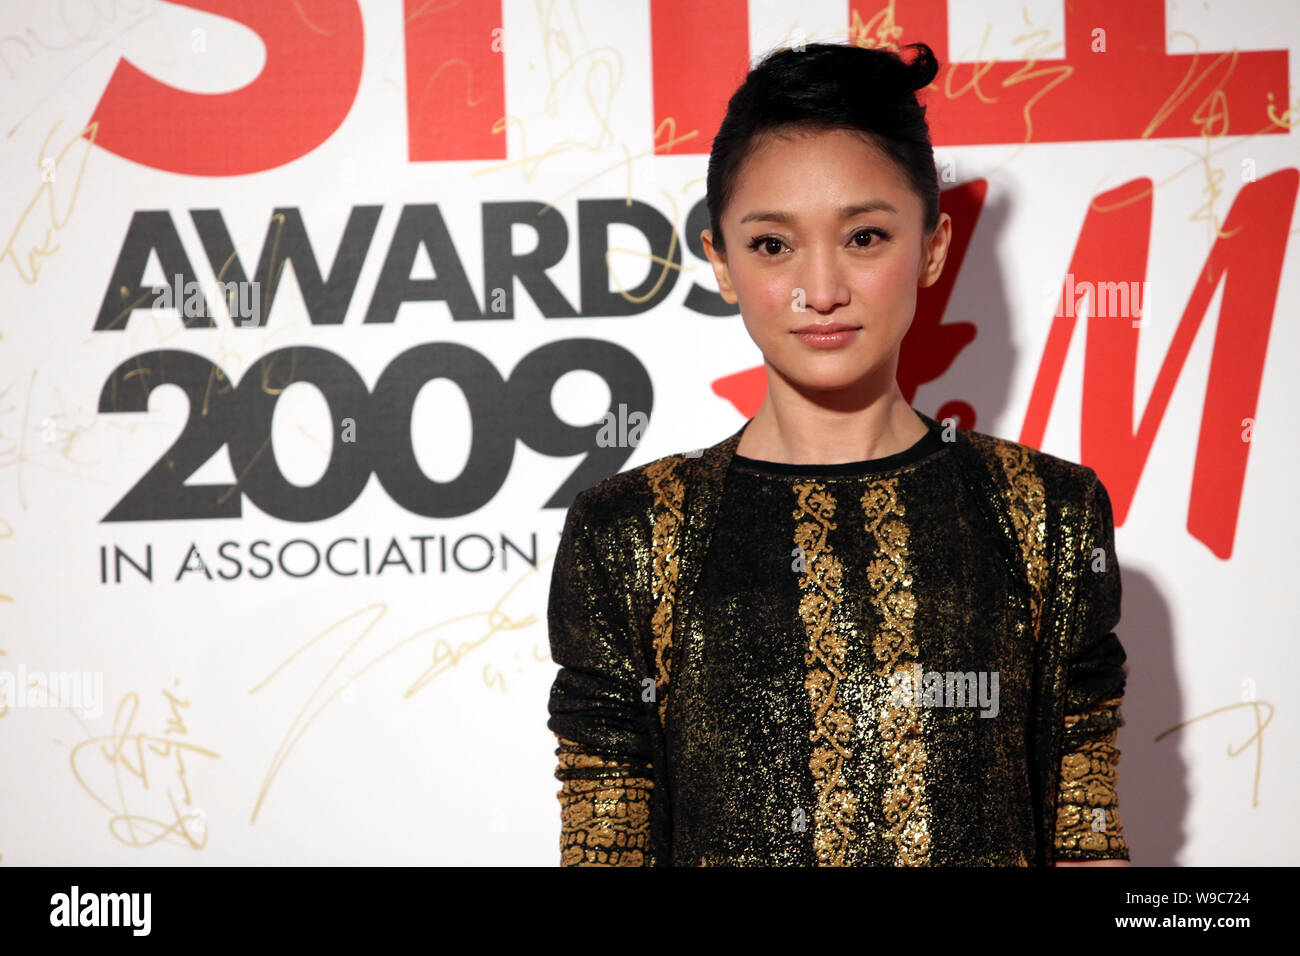 Chinese actress Zhou Xun is seen at the red carpet ceremony of ELLE Style Awards 2009 in Shanghai, China, 17 December 2009. Stock Photo